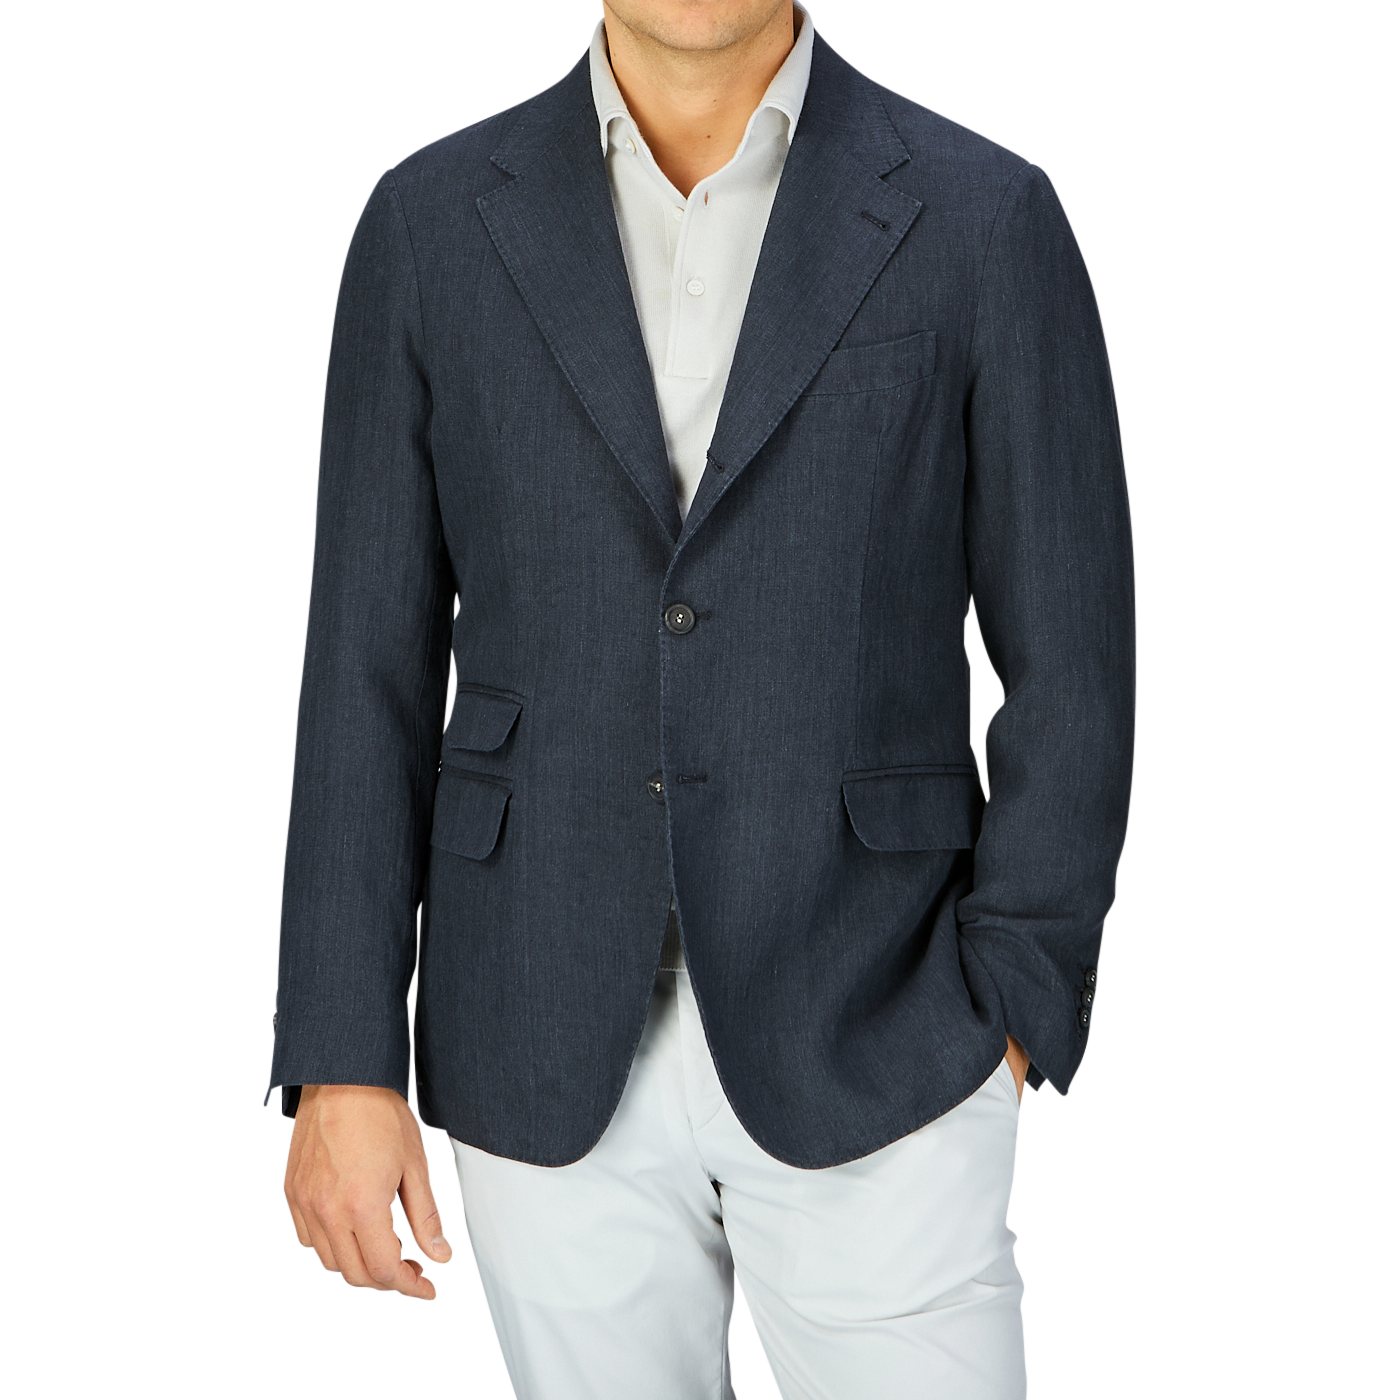 A man wearing a Massimo Alba Black Washed Linen Unstructured Blazer and white pants against a grey background.